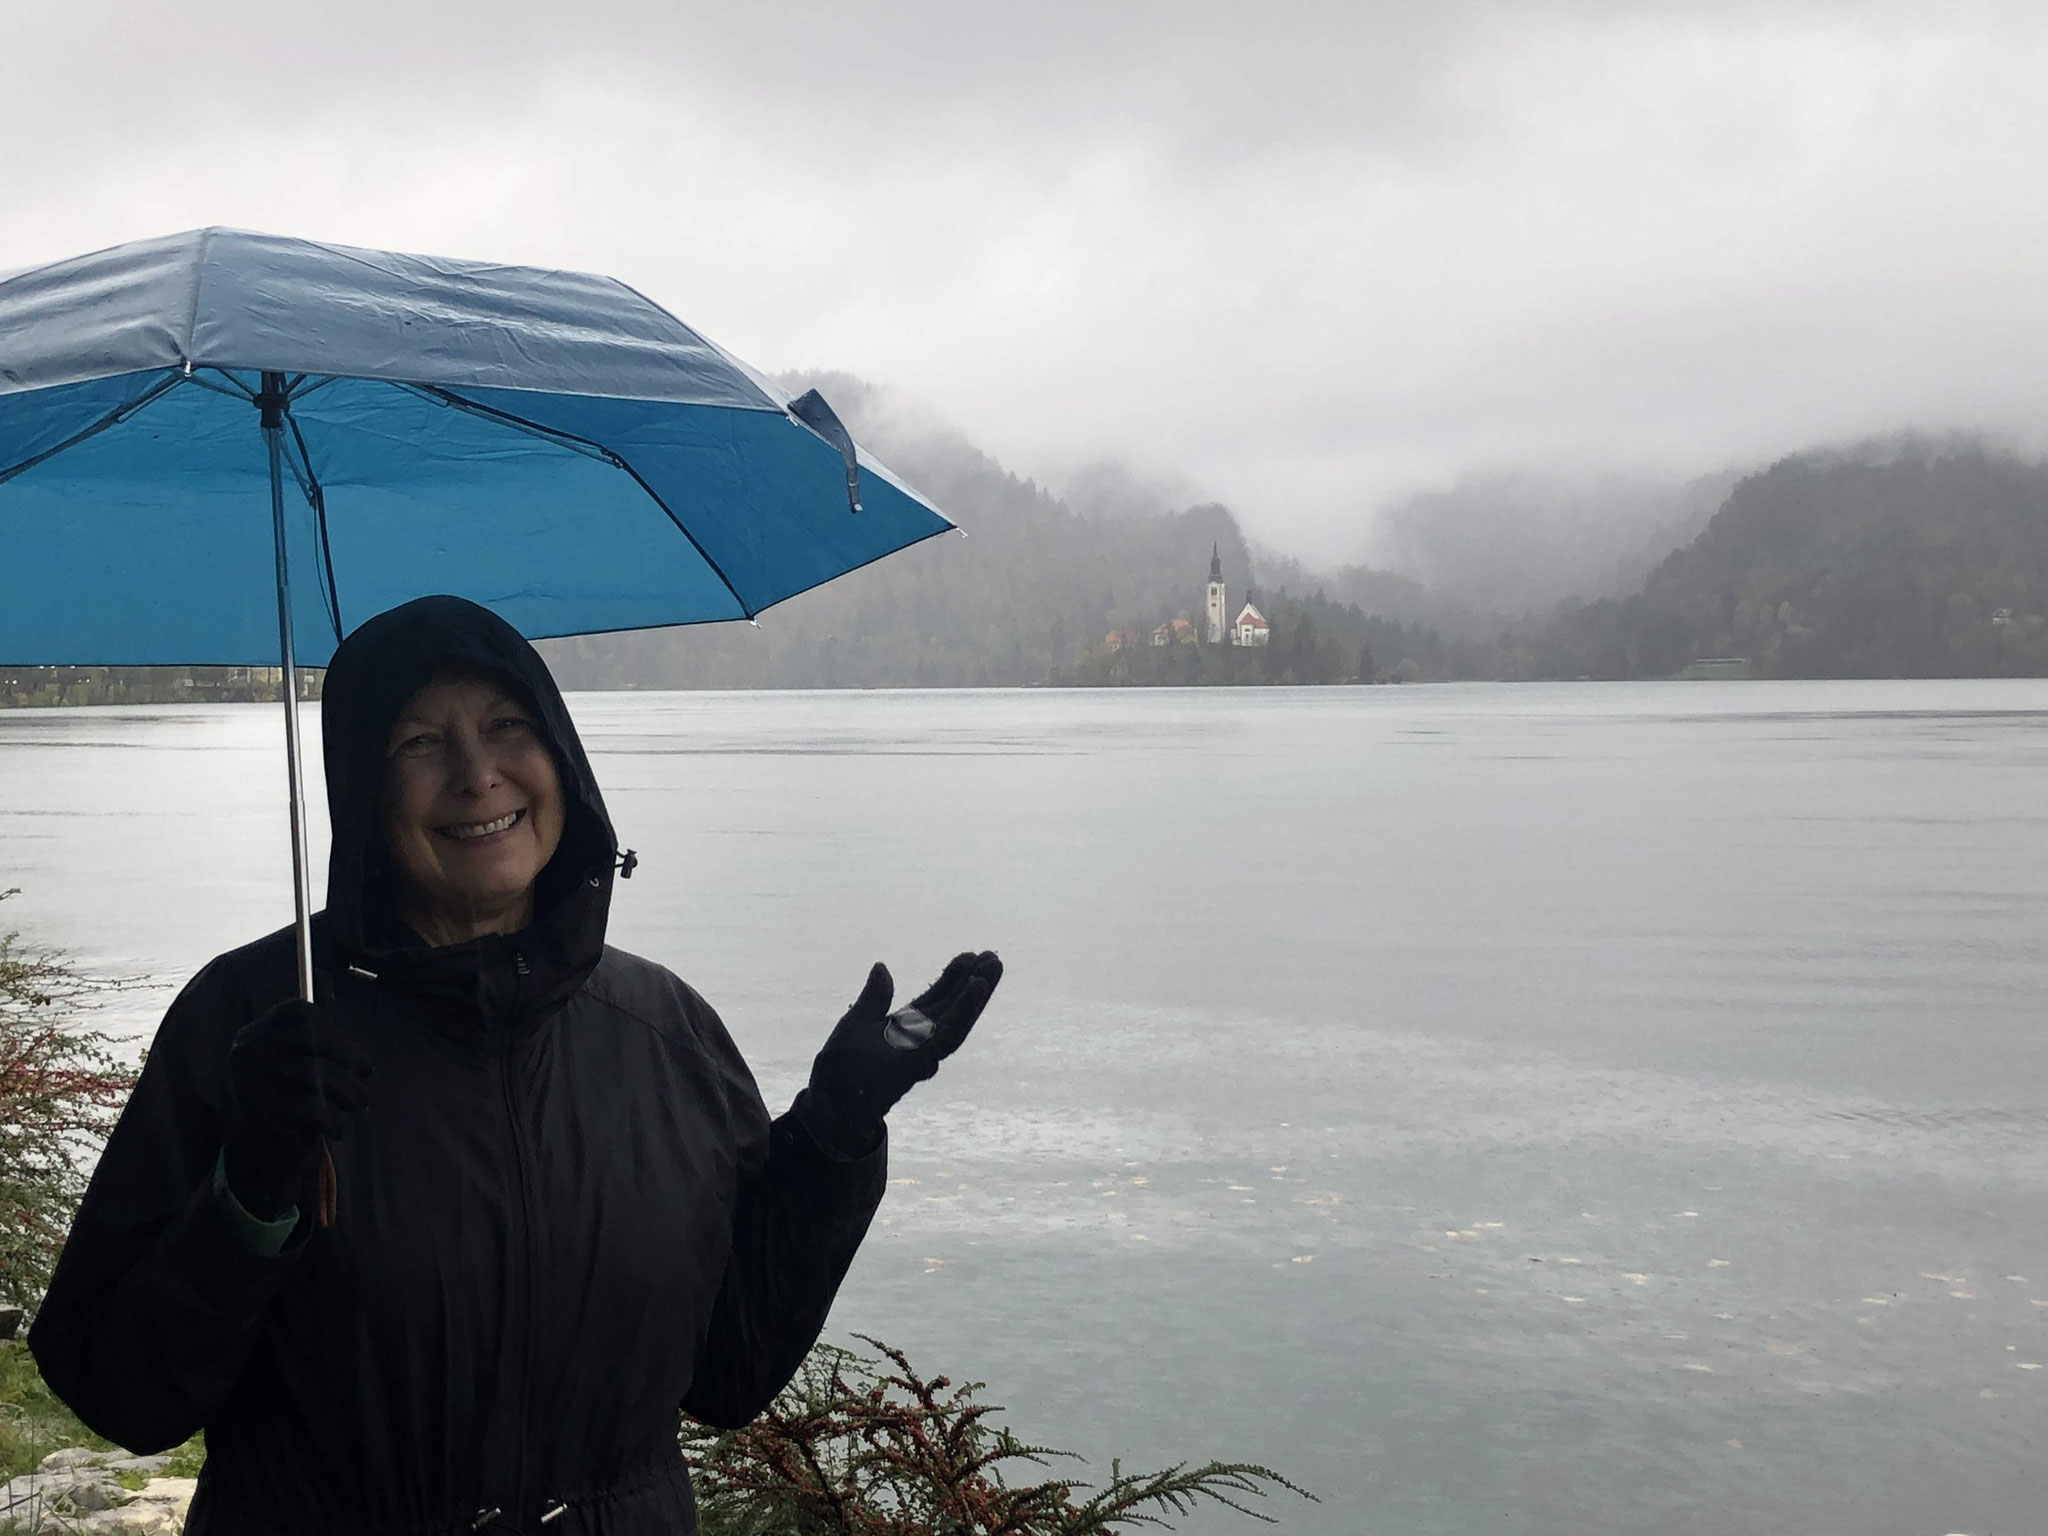 Back to the rain at Lake Bled, but a great walk.